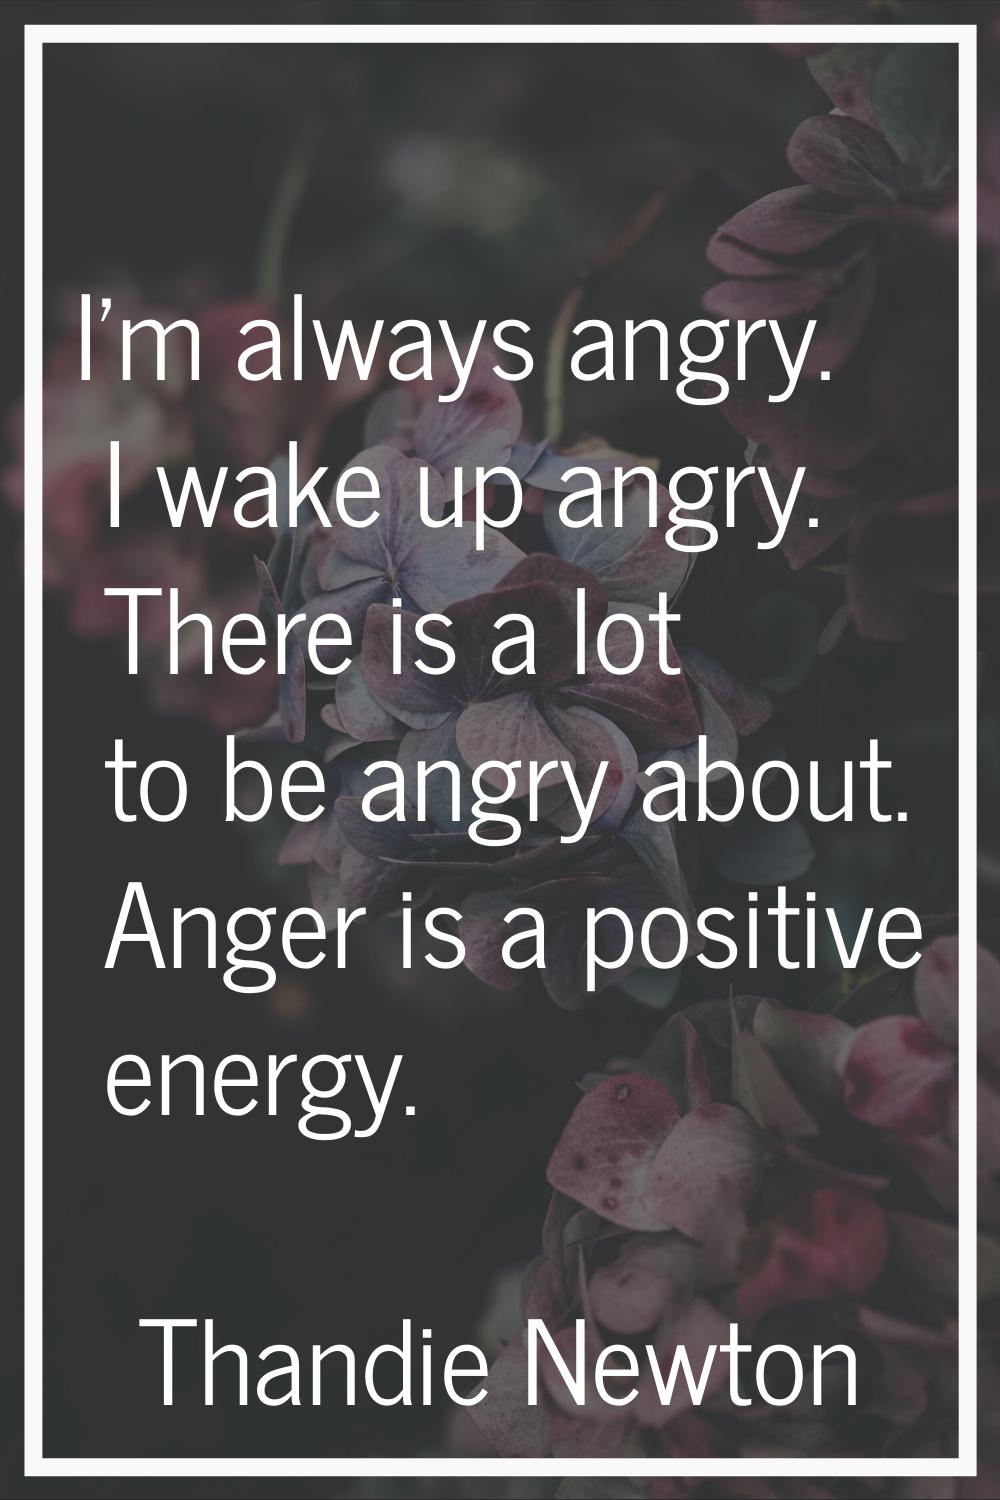 I'm always angry. I wake up angry. There is a lot to be angry about. Anger is a positive energy.